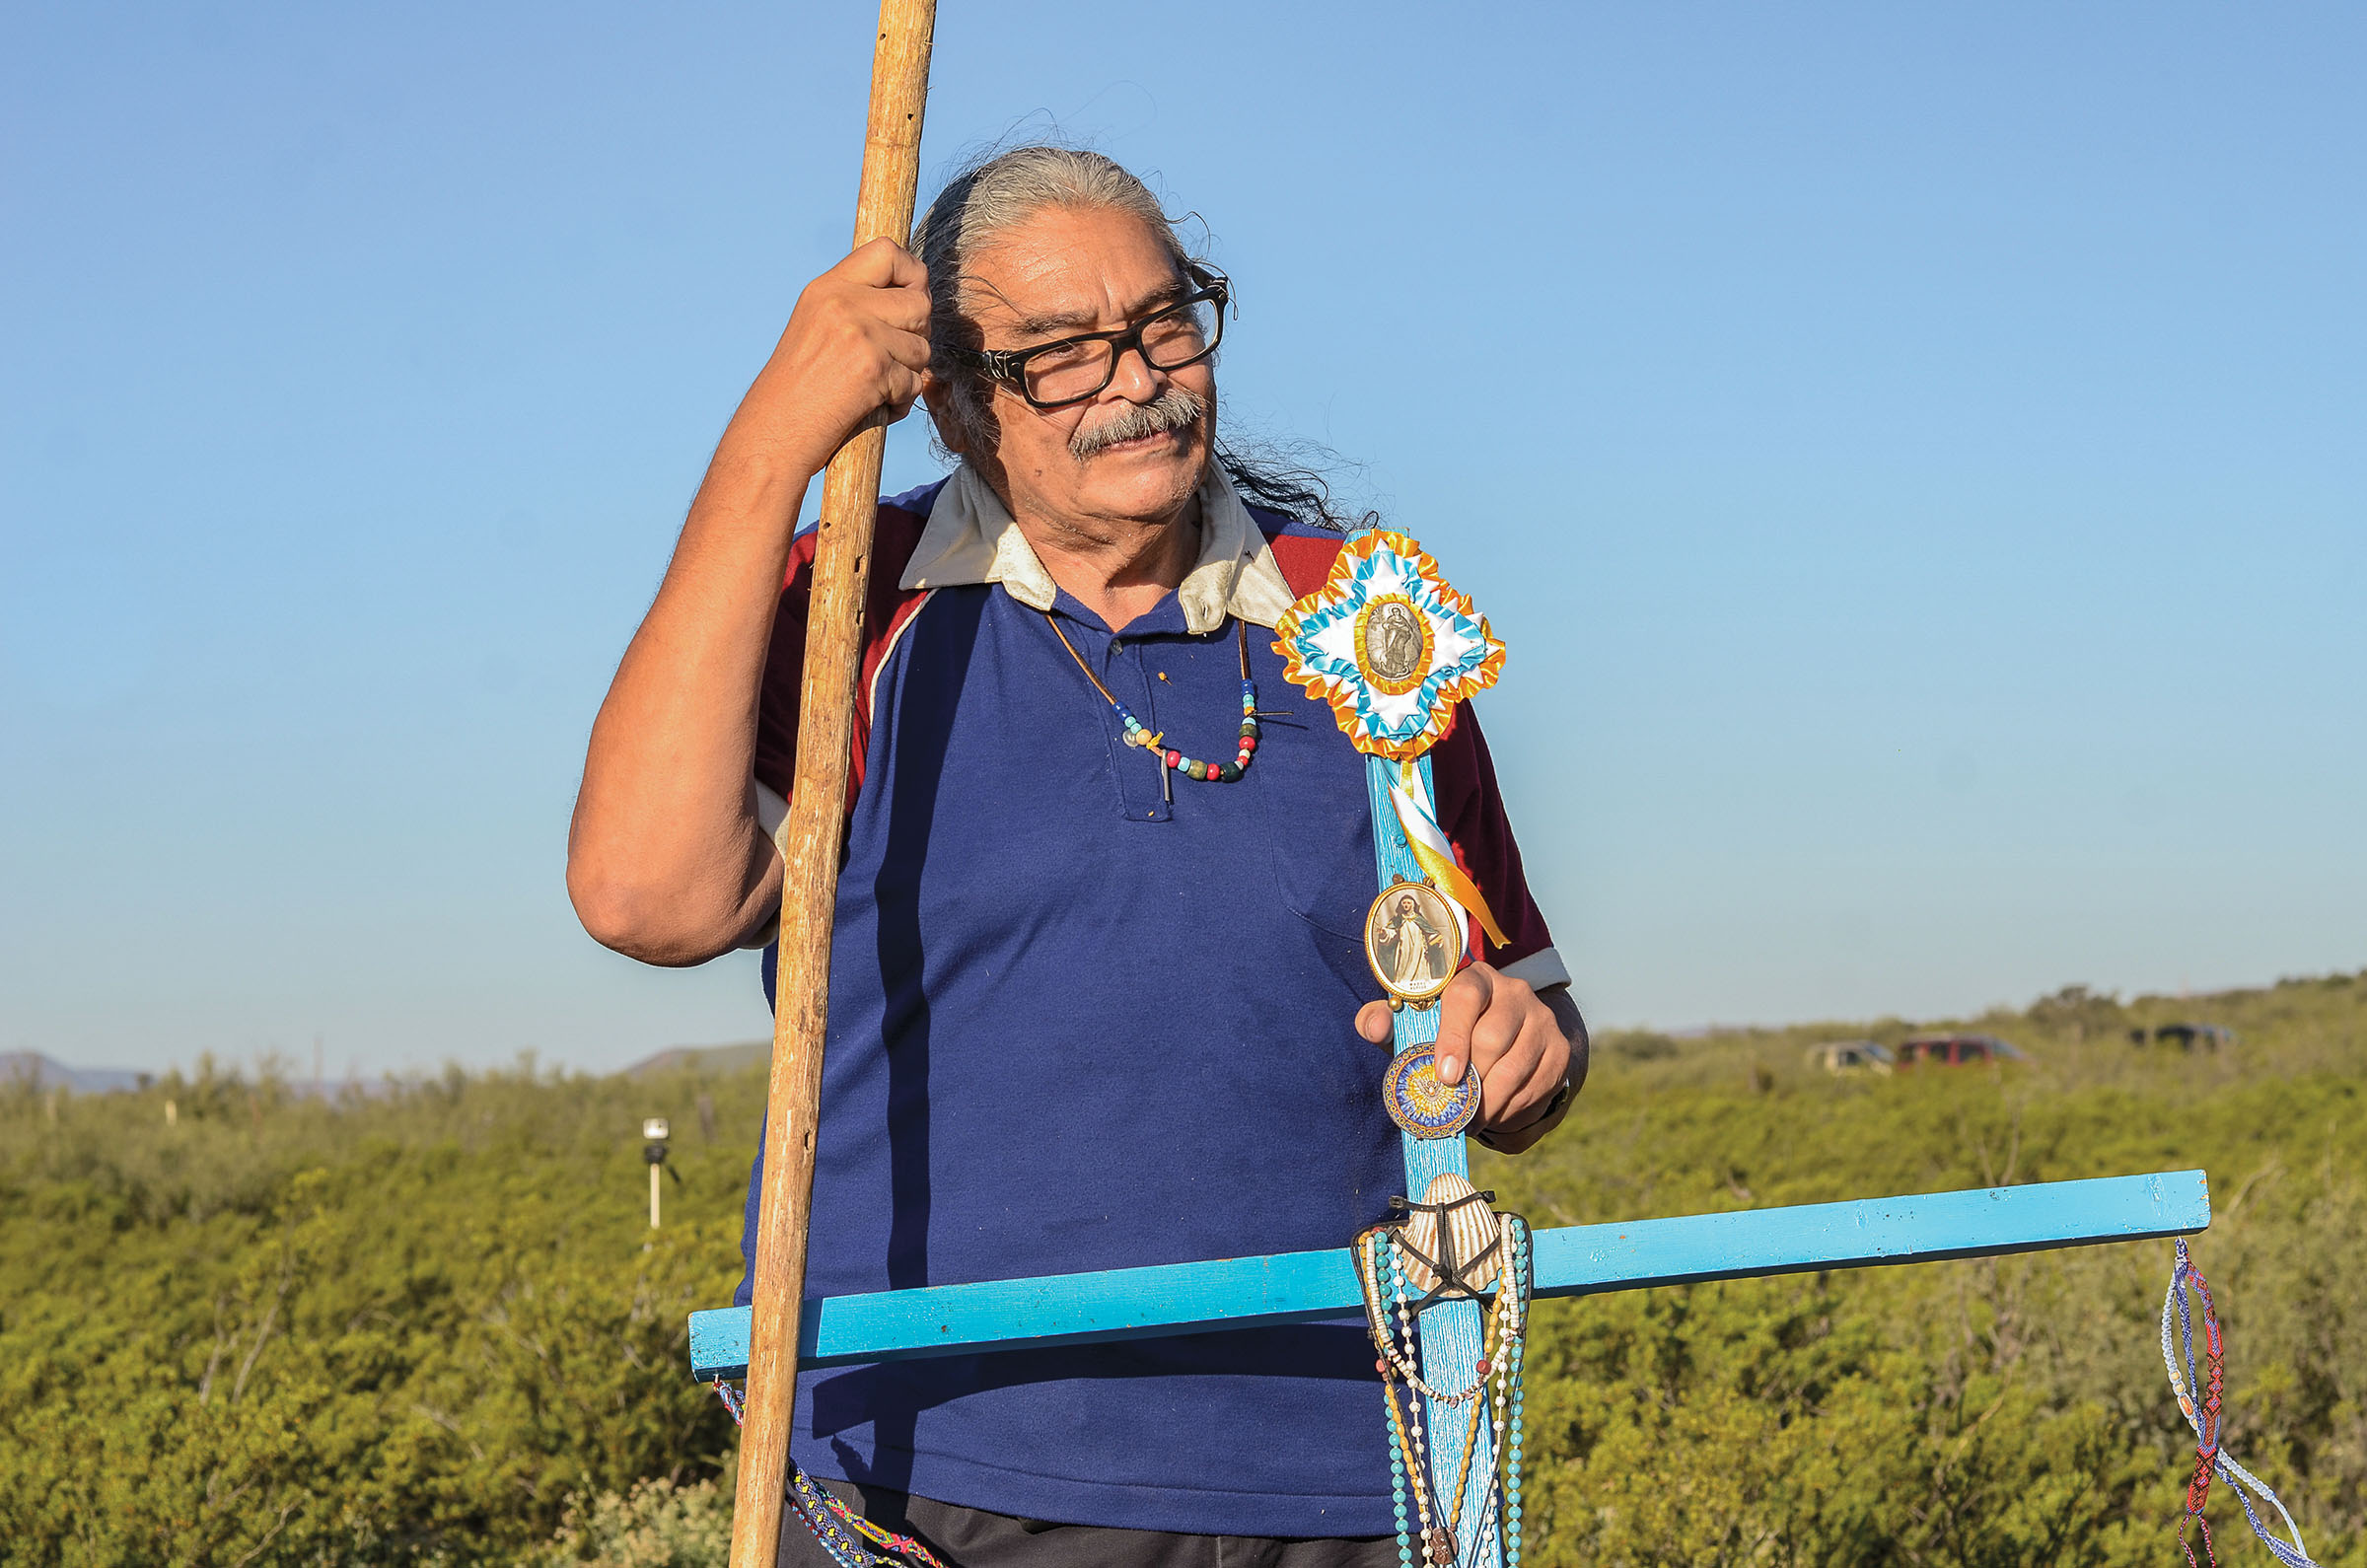 A man stands in a field with a turquoise cross decorated with beaded jewelery and intricate stitched designs